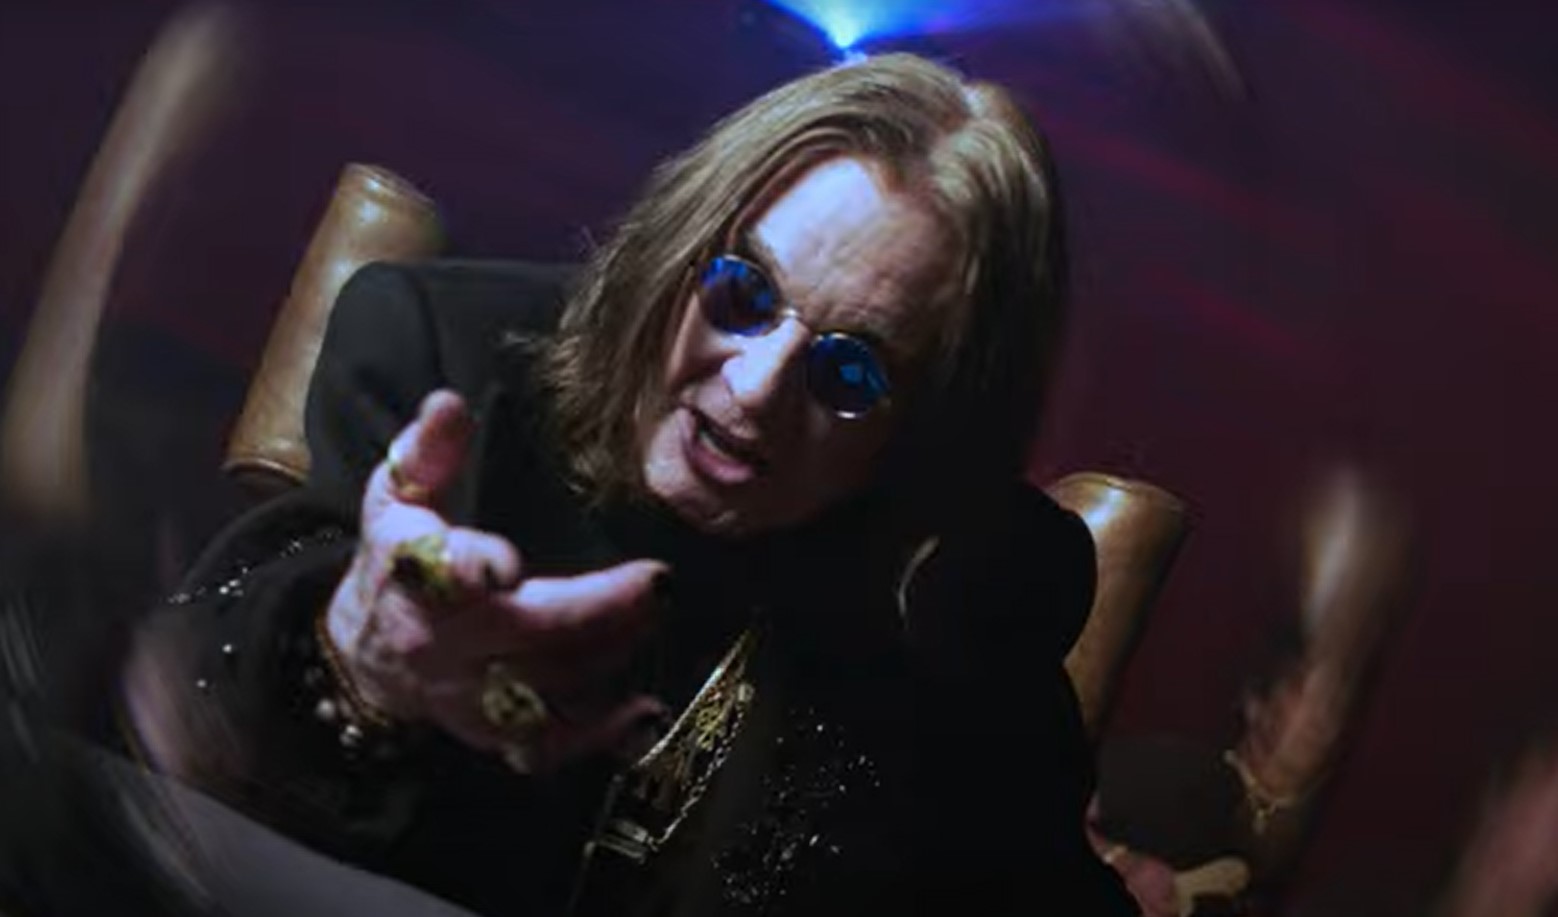 Watch New Video For "Crack Cocaine" Featuring Ozzy Osbourne From Guitarist Billy Morrison's New Album